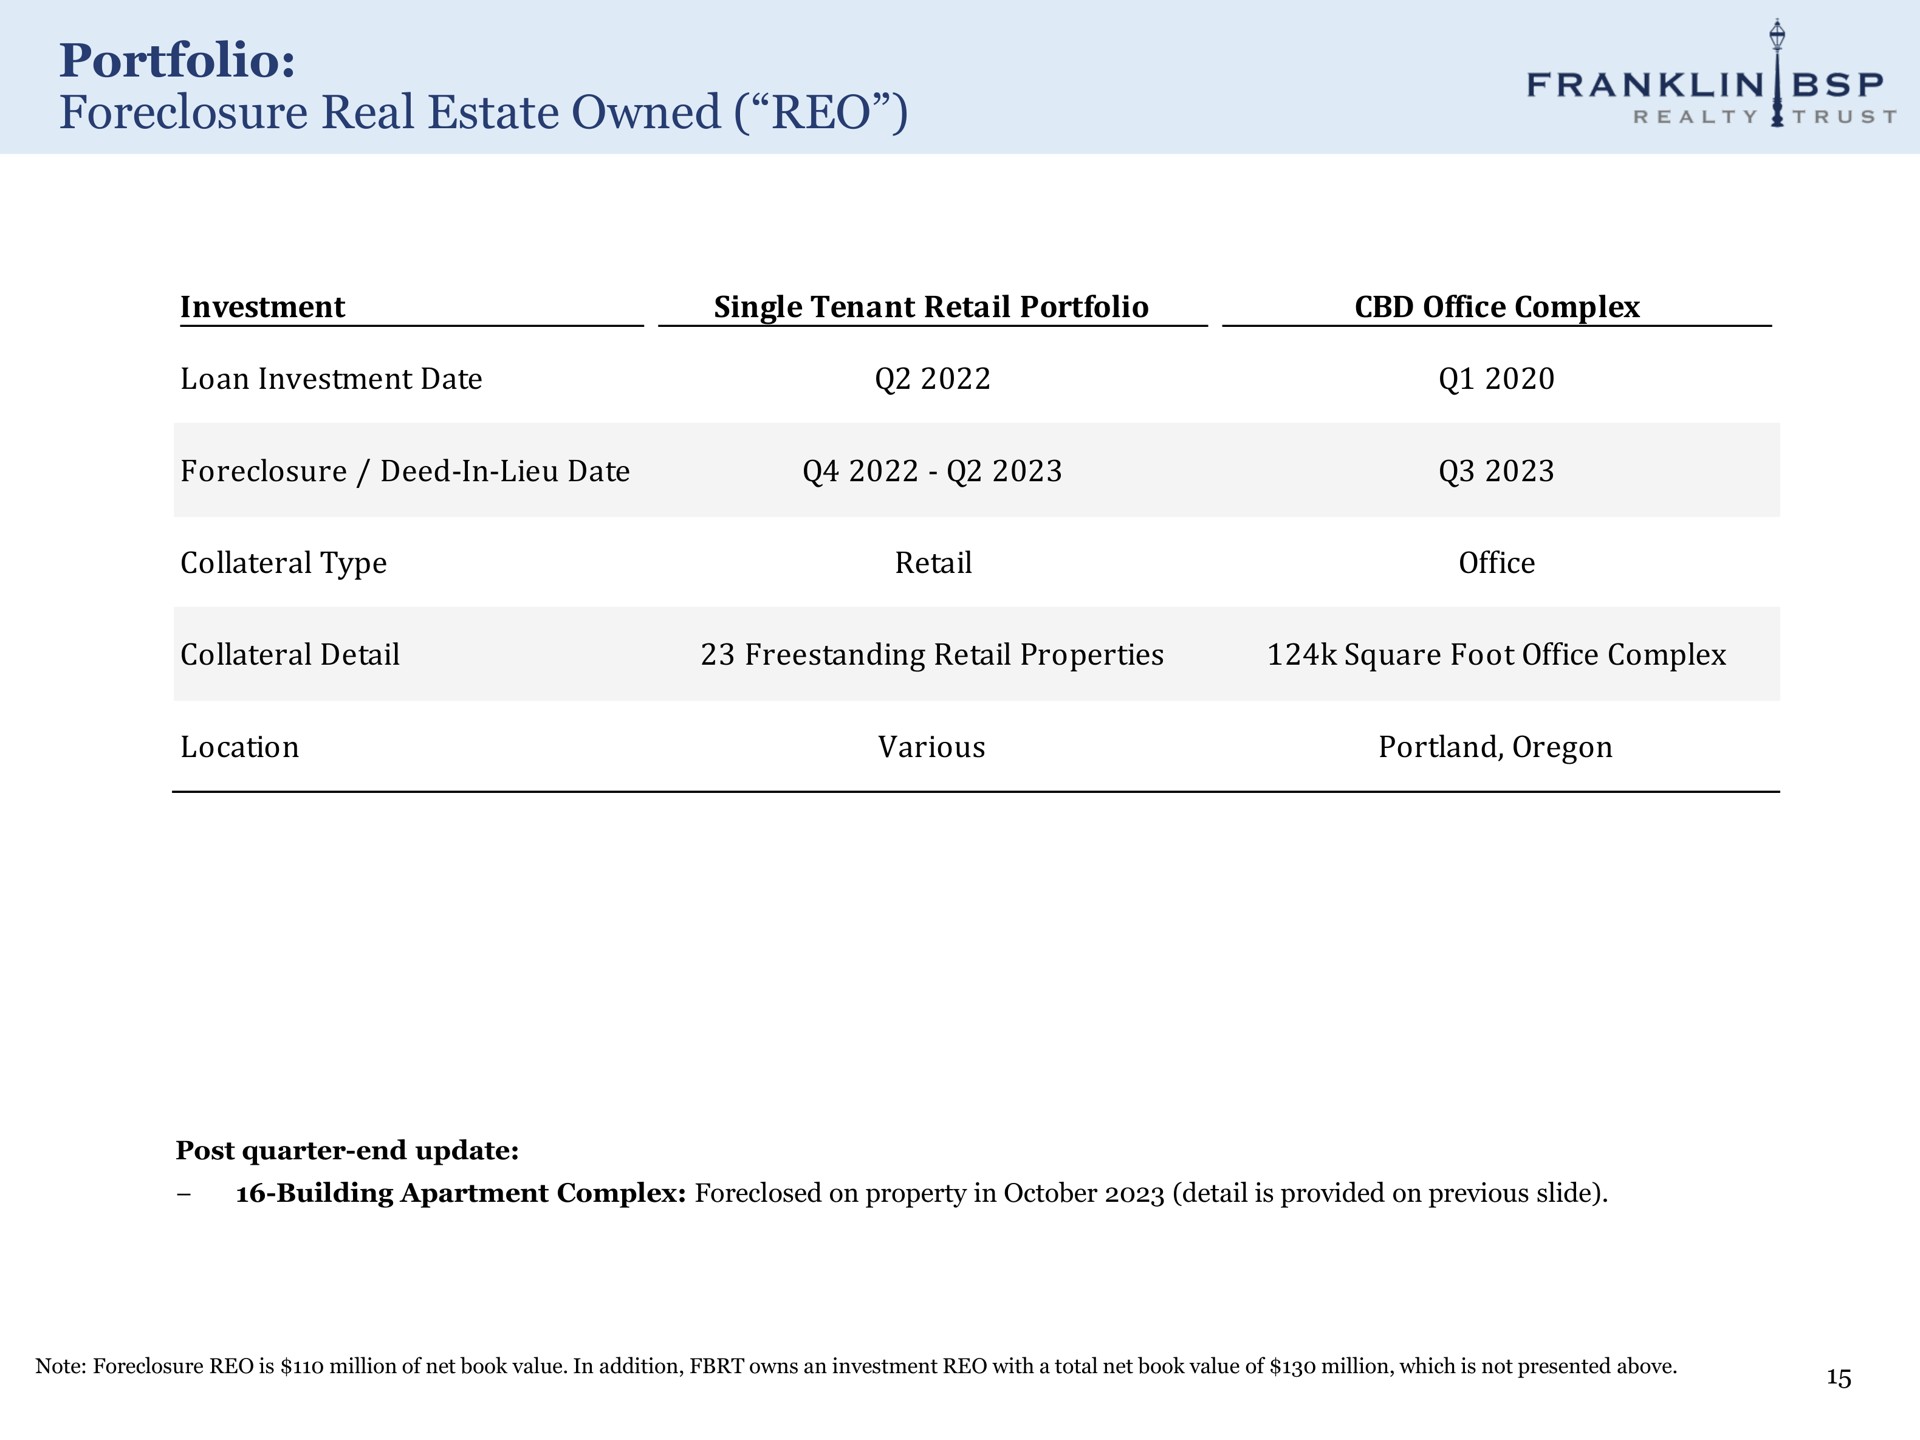 portfolio foreclosure real estate owned | Franklin BSP Realty Trust